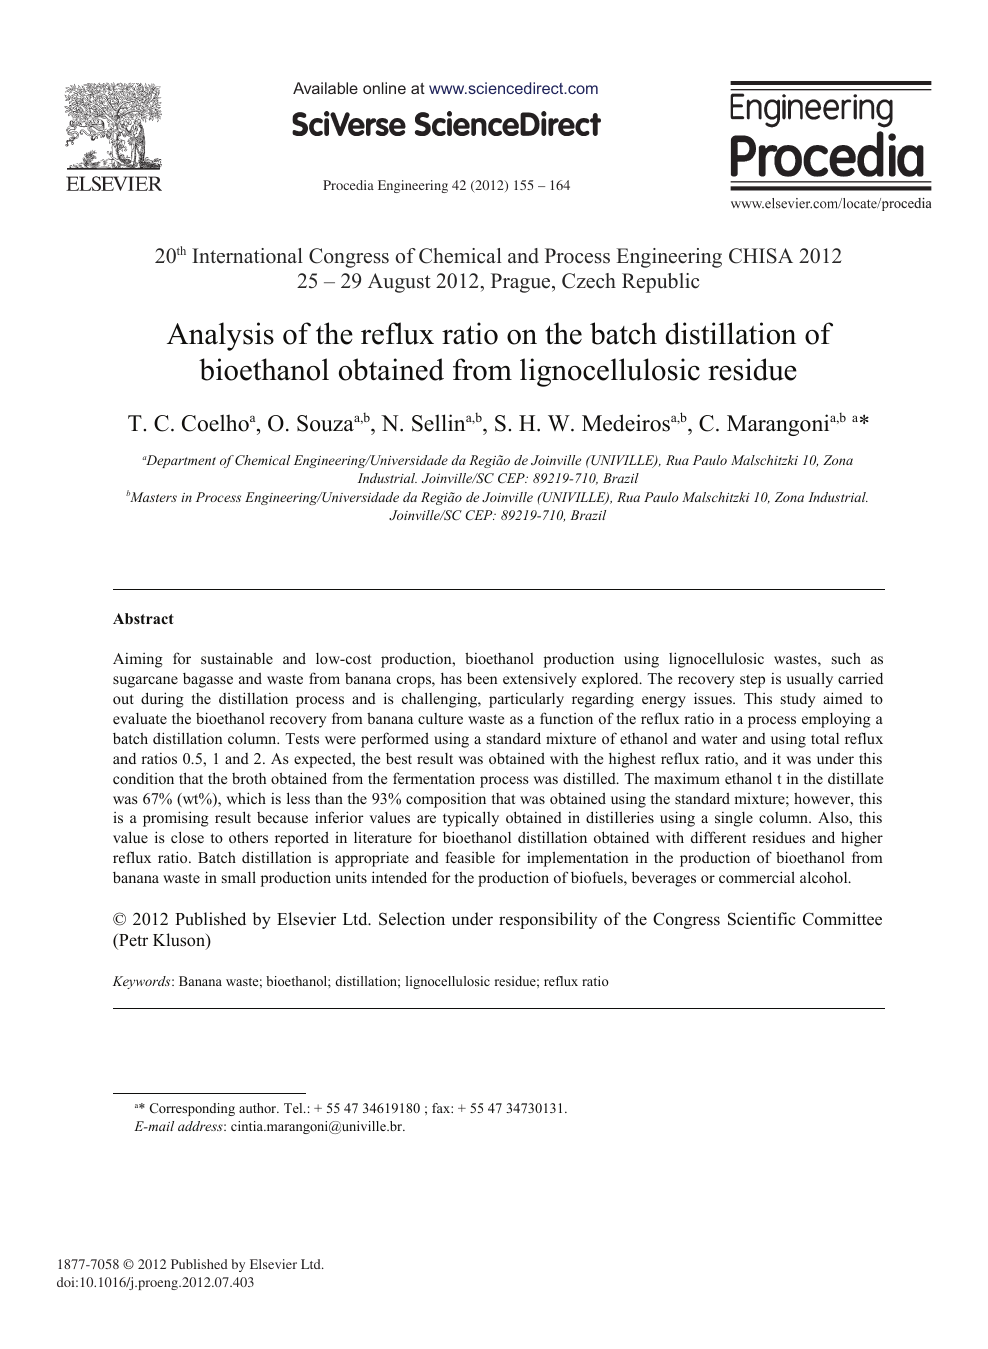 Analysis of the Reflux Ratio on the Batch Distillation of Bioethanol  Obtained from Lignocellulosic Residue – topic of research paper in  Materials engineering. Download scholarly article PDF and read for free on